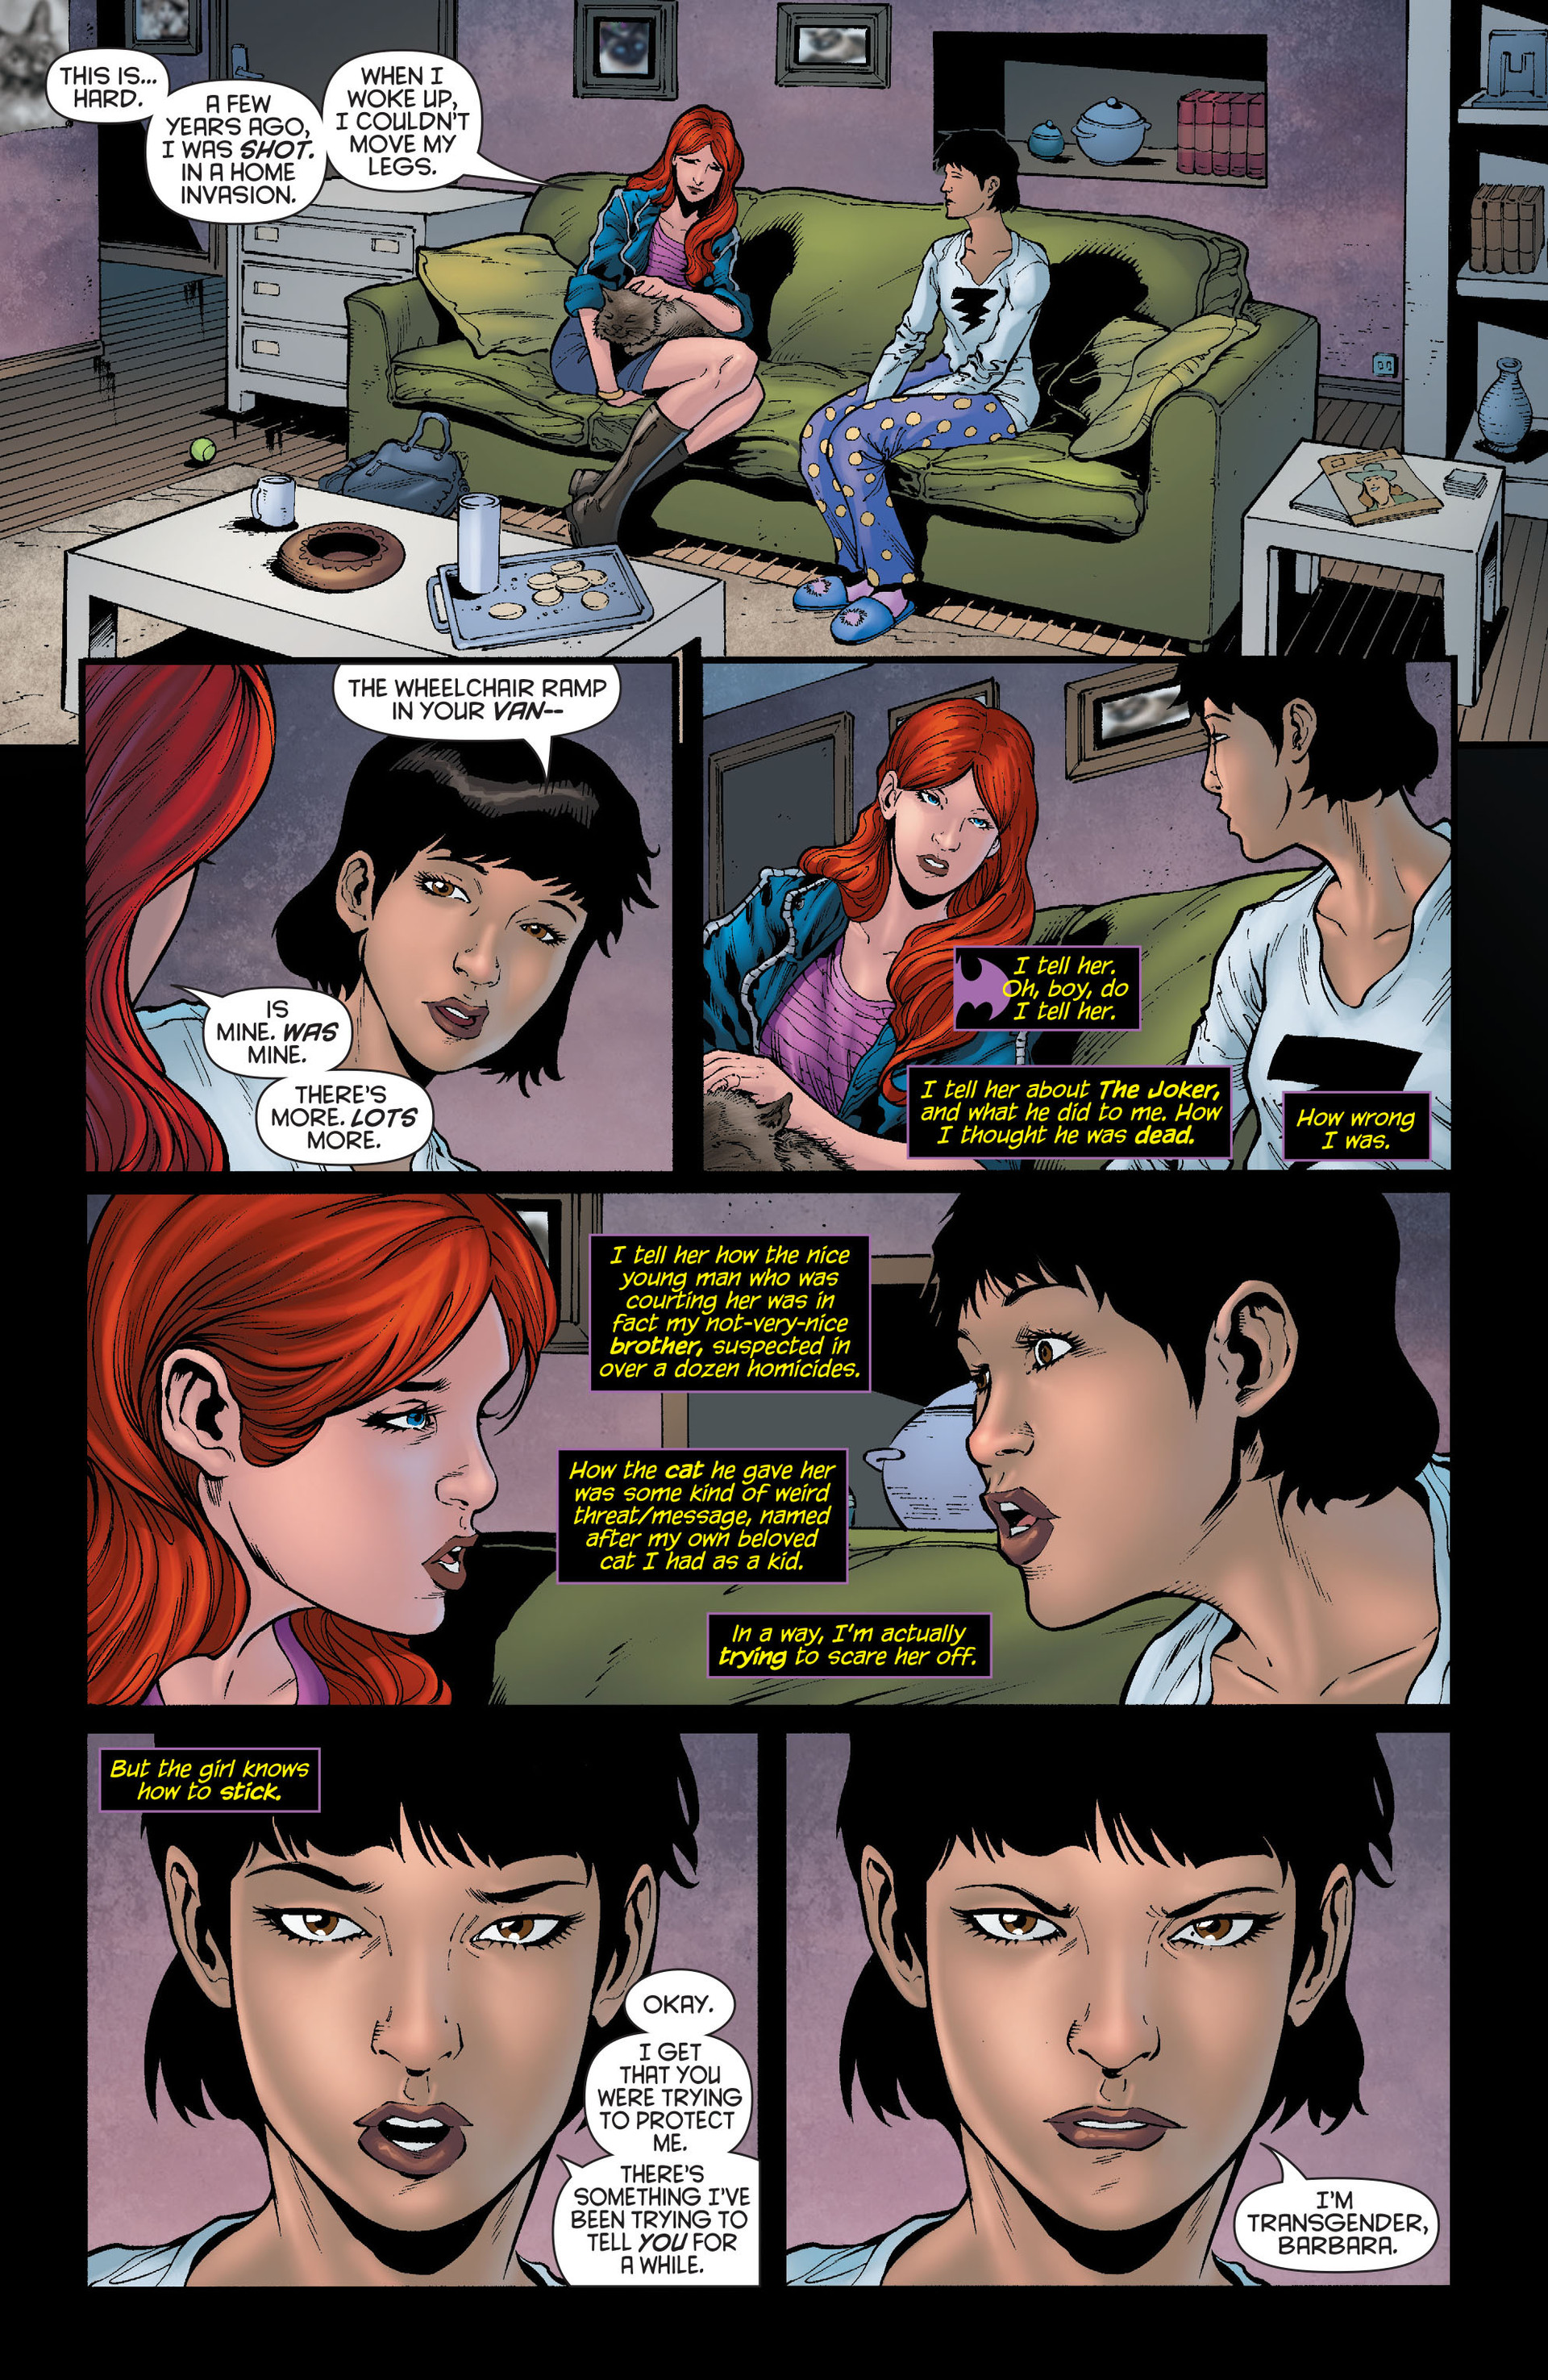 Batgirl 2011 Issue 19 | Read Batgirl 2011 Issue 19 comic online in high  quality. Read Full Comic online for free - Read comics online in high  quality .